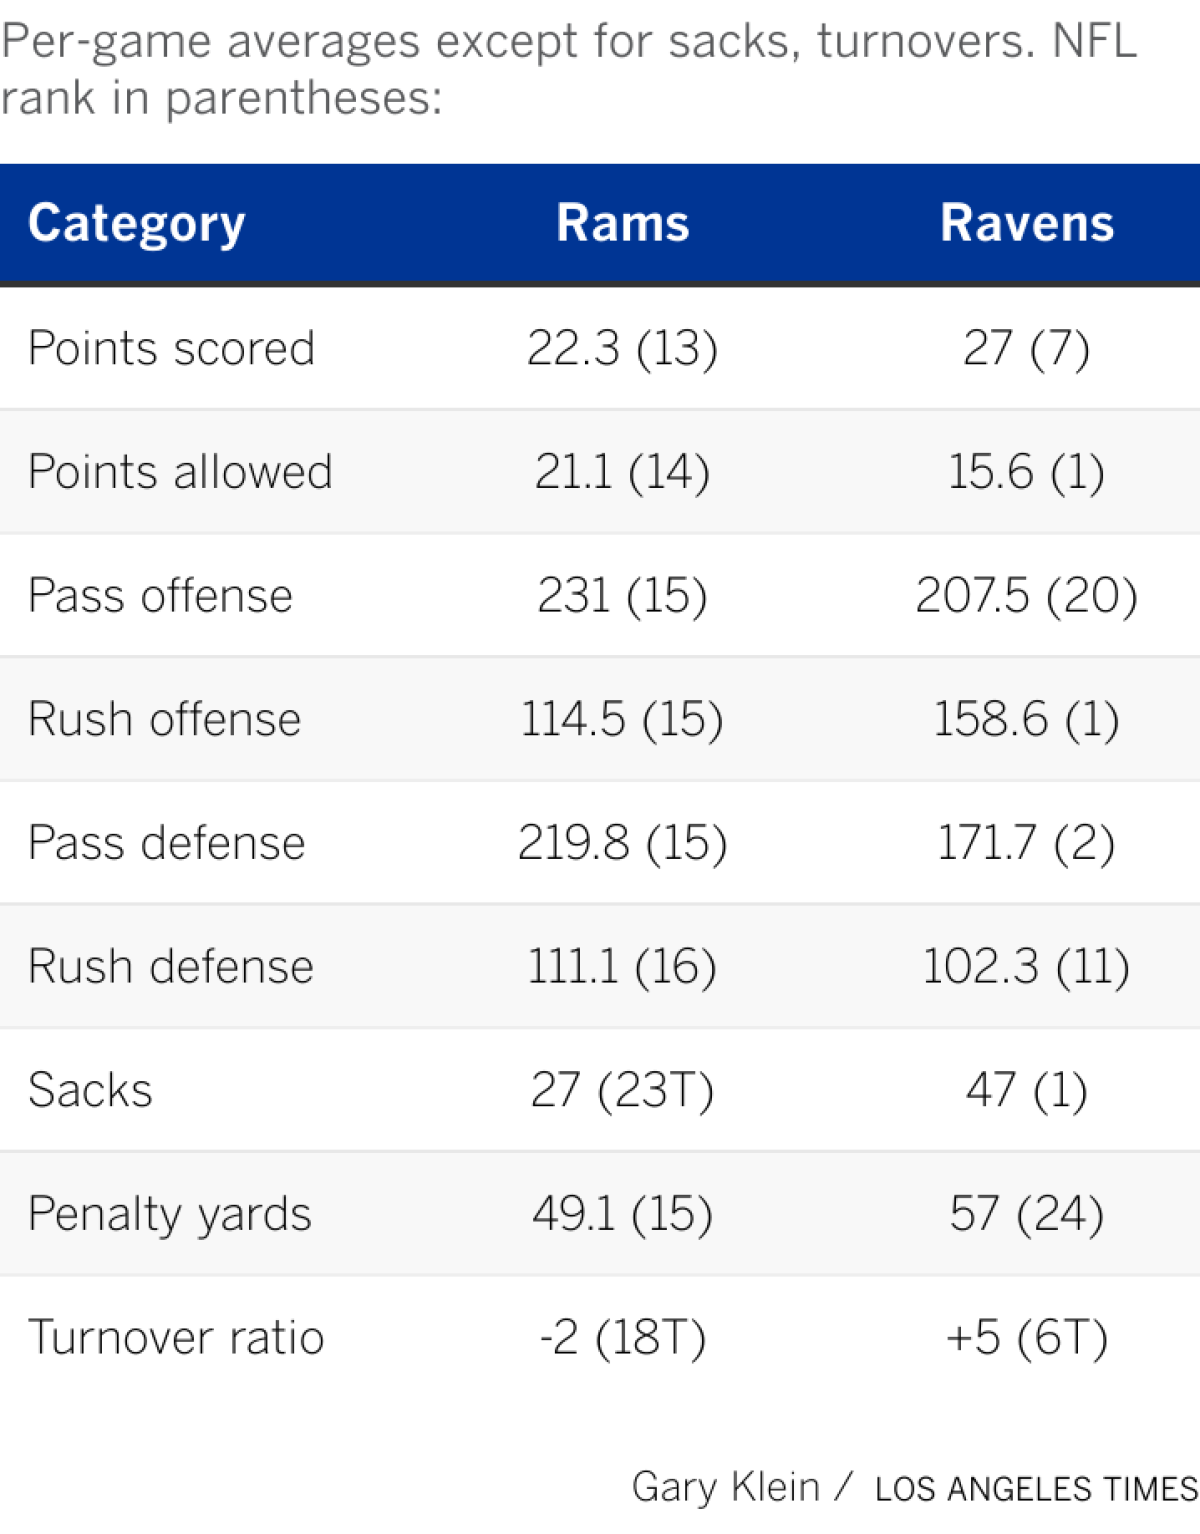 Breaking down the top team statistics for both the Rams and the Ravens.